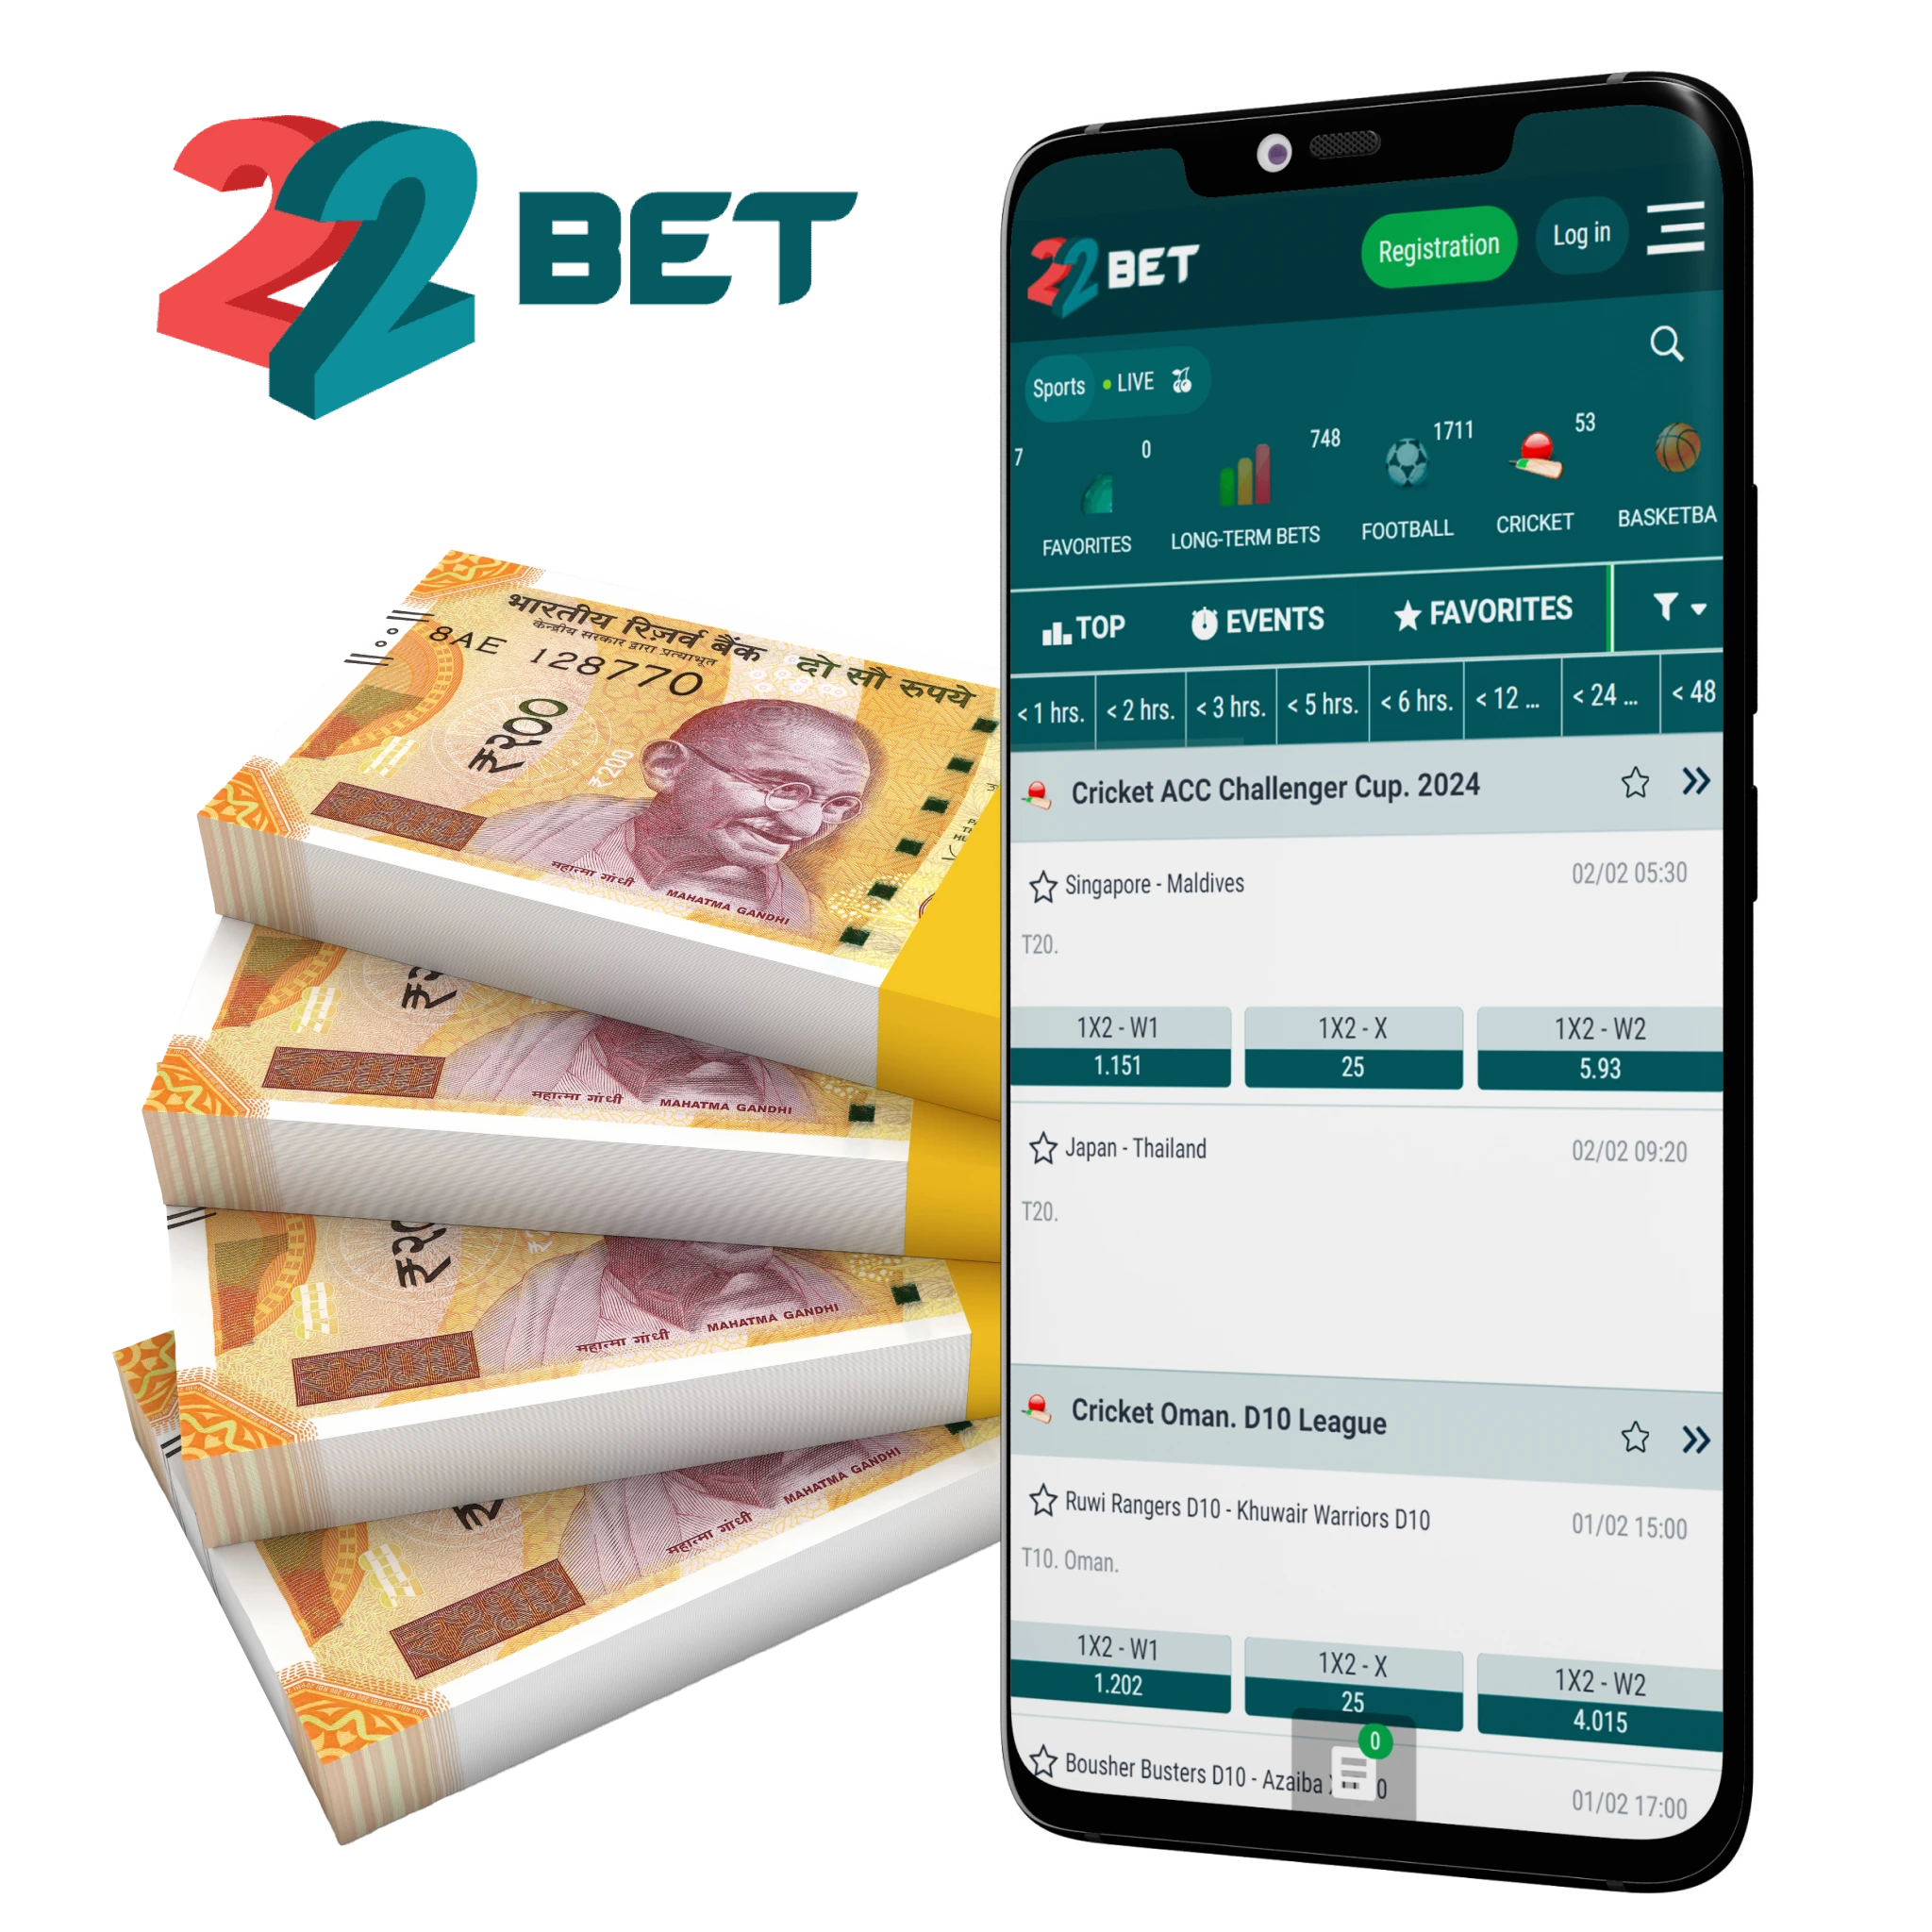 An enjoyable welcome bonus for real money cricket betting awaits you after downloaded the 22bet app.